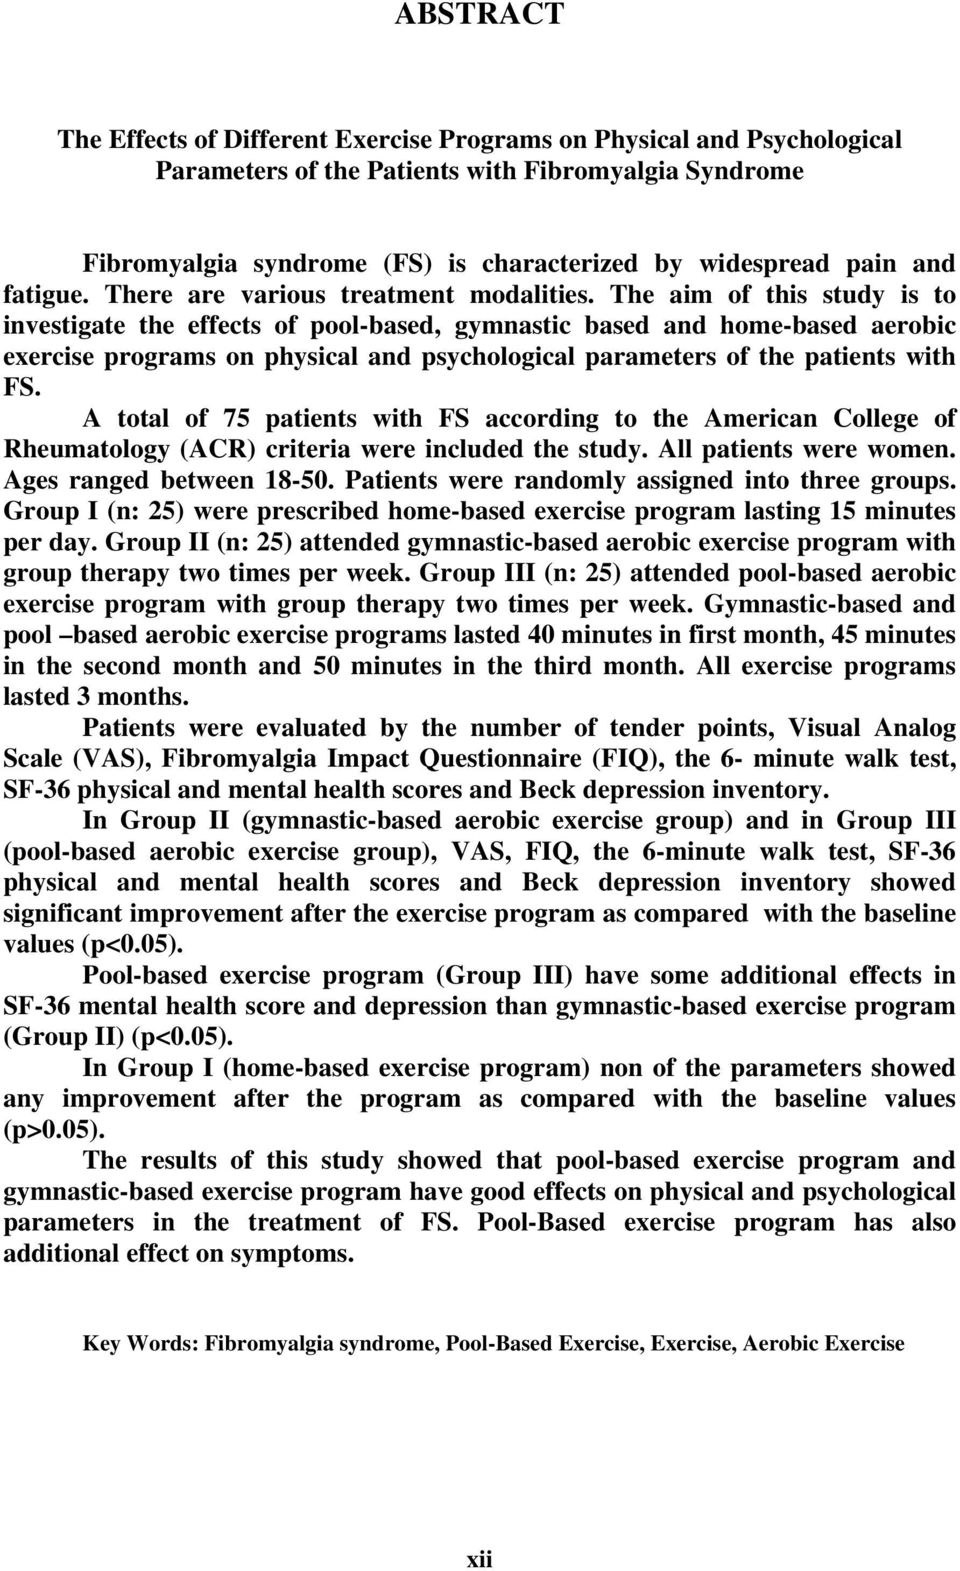 The aim of this study is to investigate the effects of pool-based, gymnastic based and home-based aerobic exercise programs on physical and psychological parameters of the patients with FS.